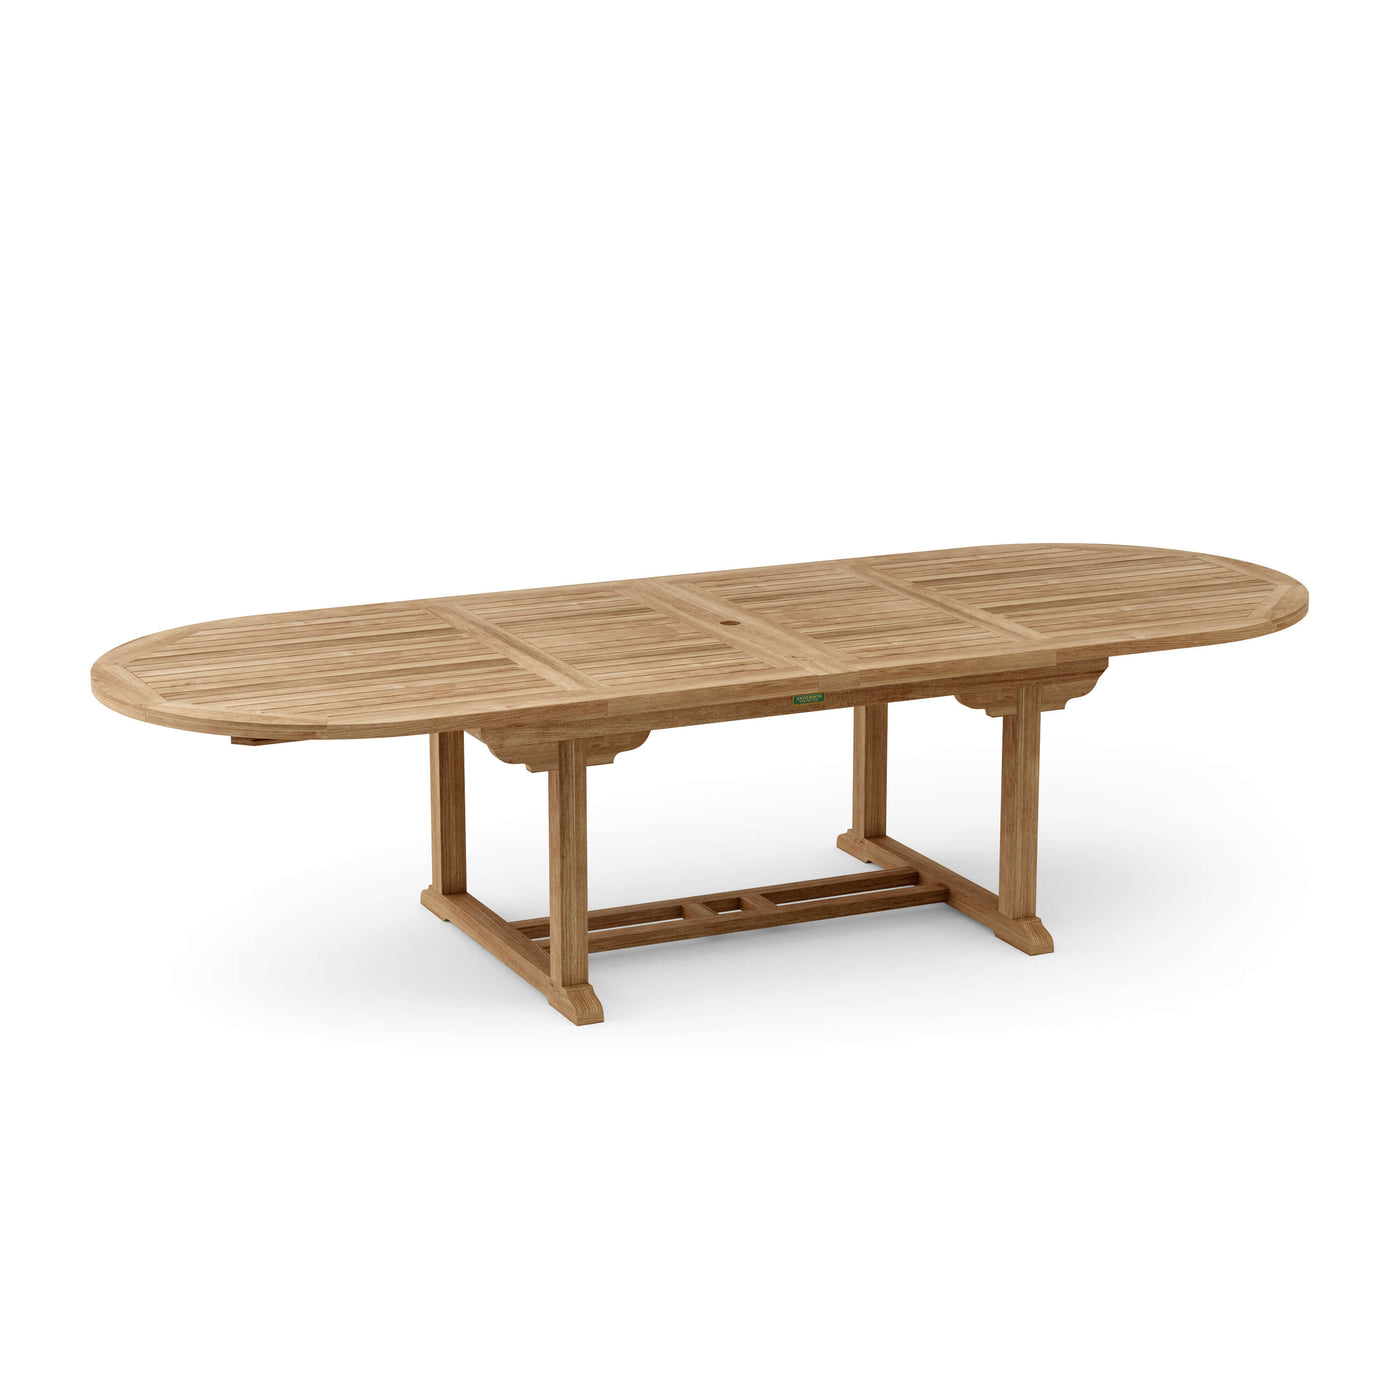 Bahama 117" Oval Extension Table